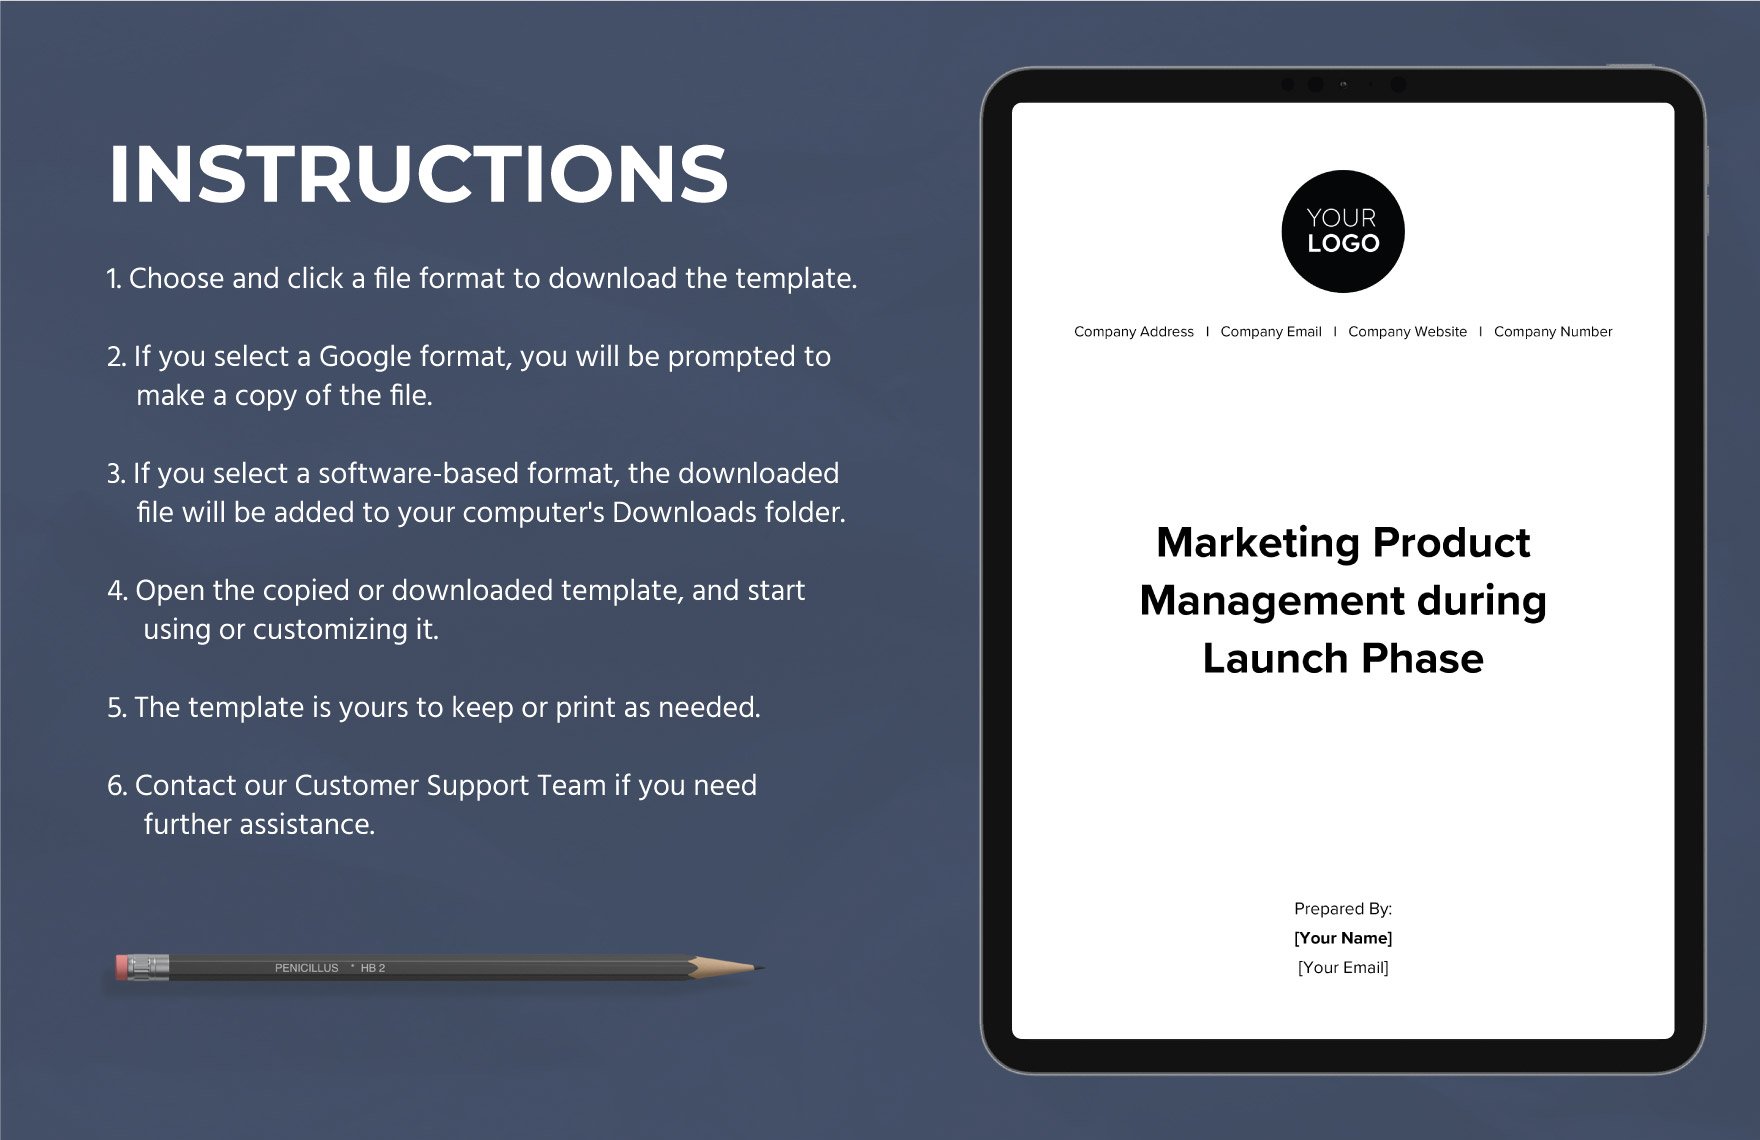 Marketing Product Management during Launch Phase Template